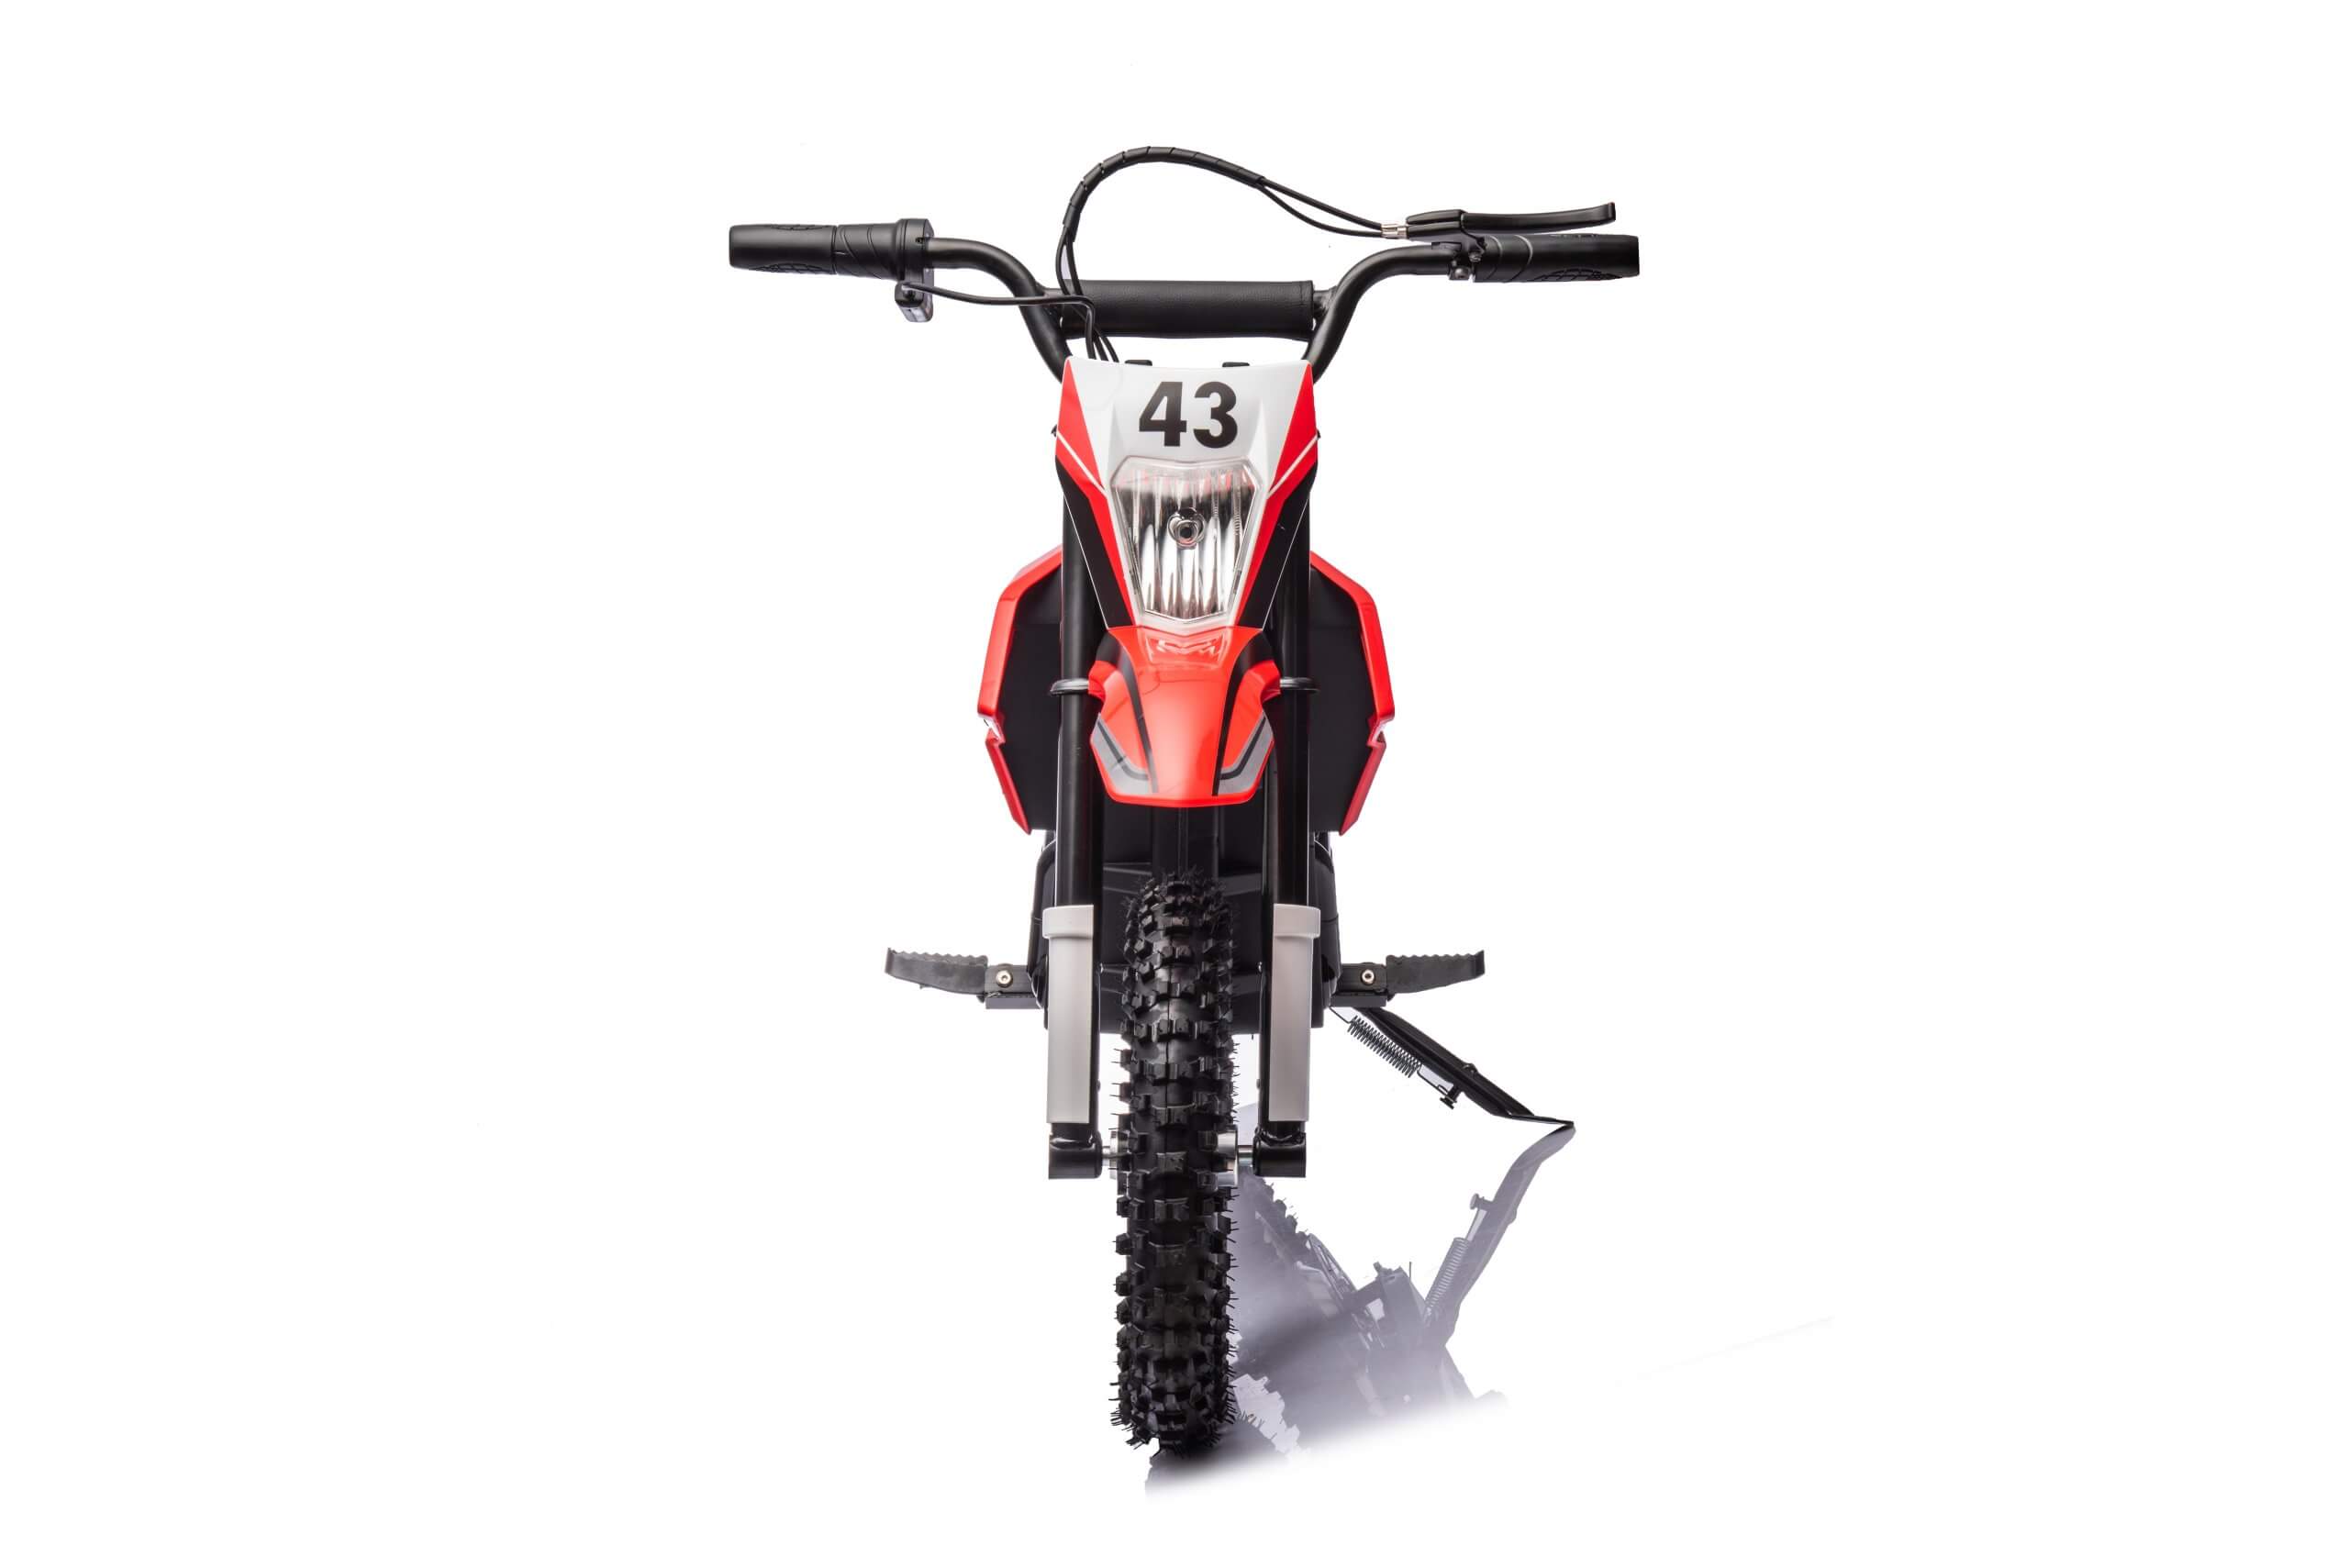 Kidsvip 36V Dirtbike 25Kmh Red2023 10 02 At 11.27.59 Am 2 Scaled 22 Browse By Price $400 – $999+